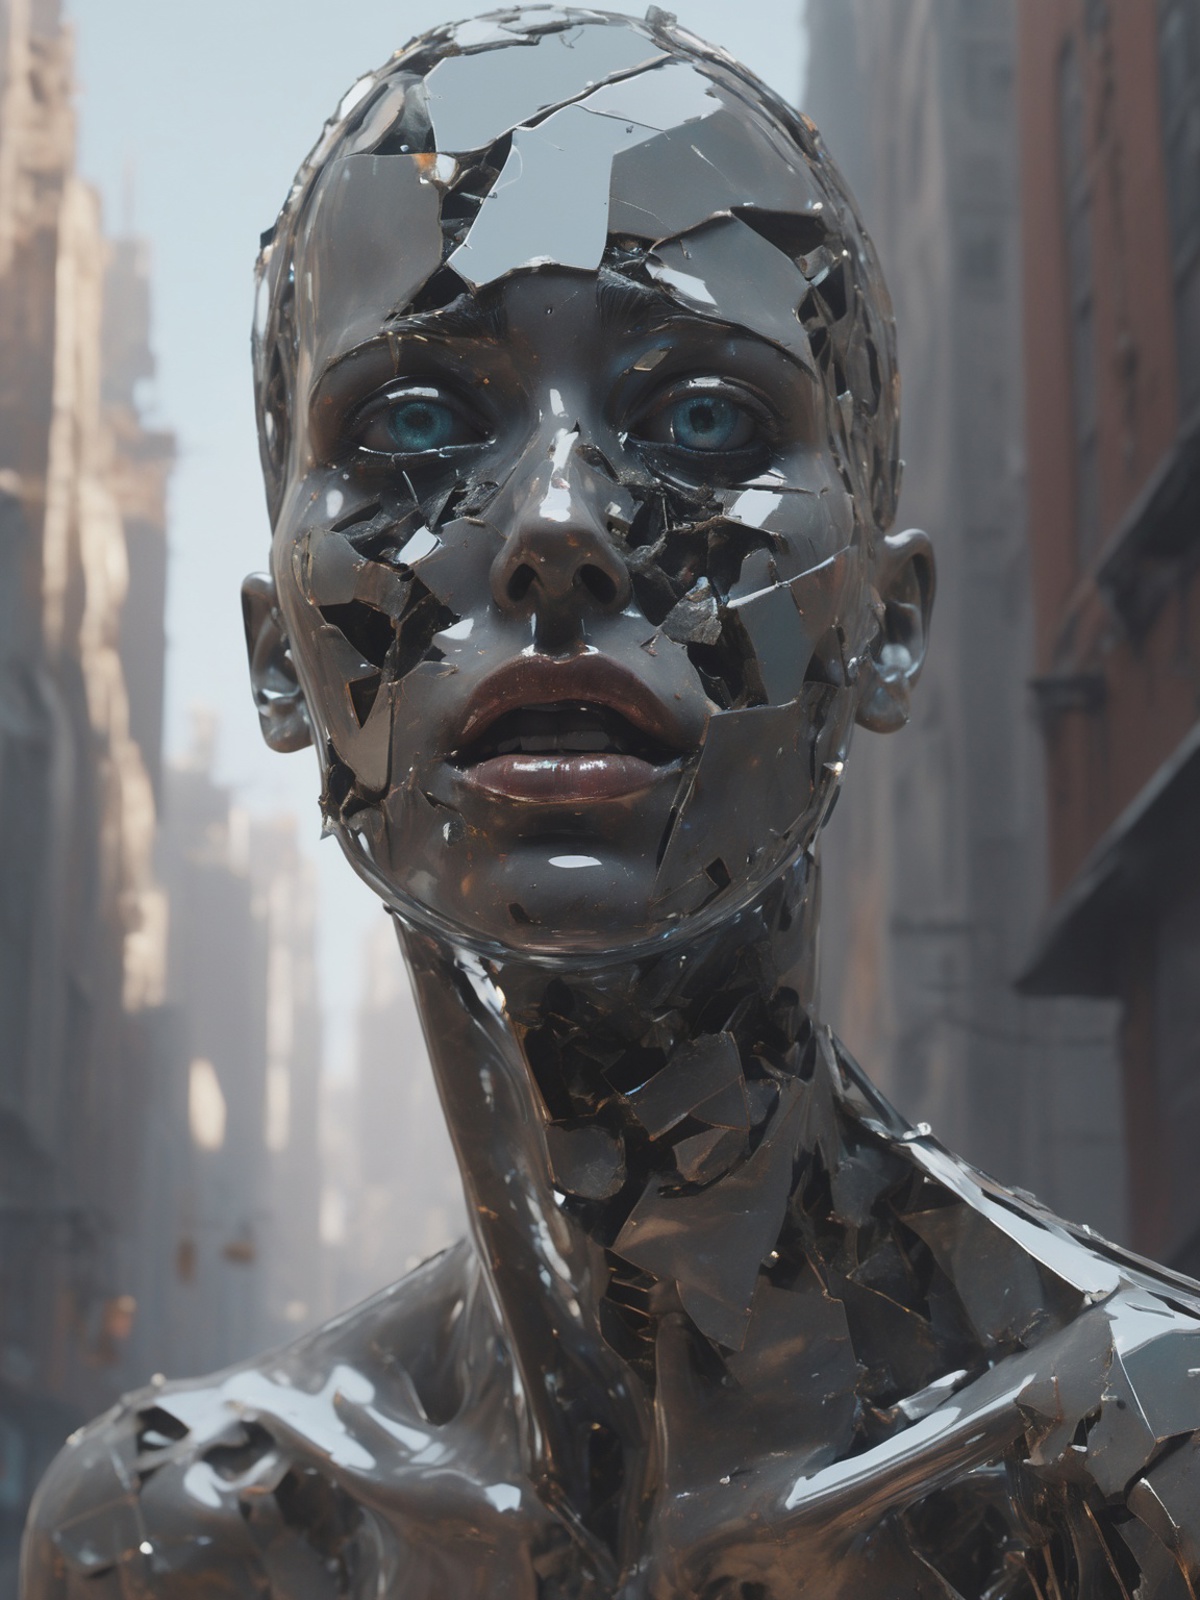 A robotic face with blue eyes and shards of mirrors on it.